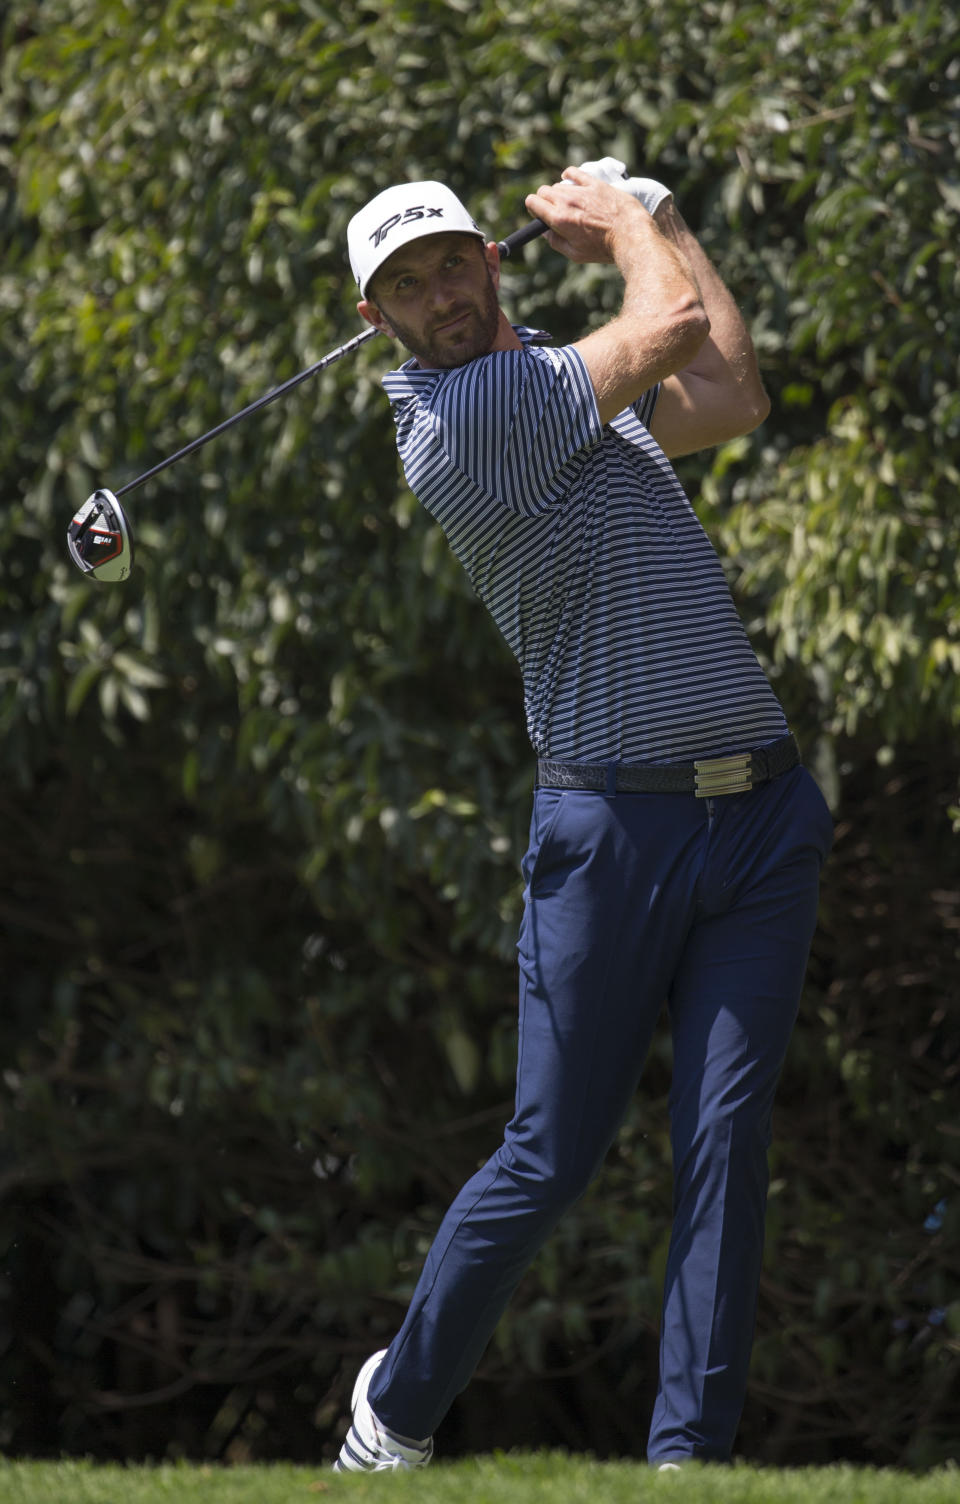 U.S. golfer Dustin Johnson watches his ball in the second hole during the WGC-Mexico Championship at the Chapultepec Golf Club in Mexico City, Sunday, Feb. 24, 2019. (AP Photo/Christian Palma)